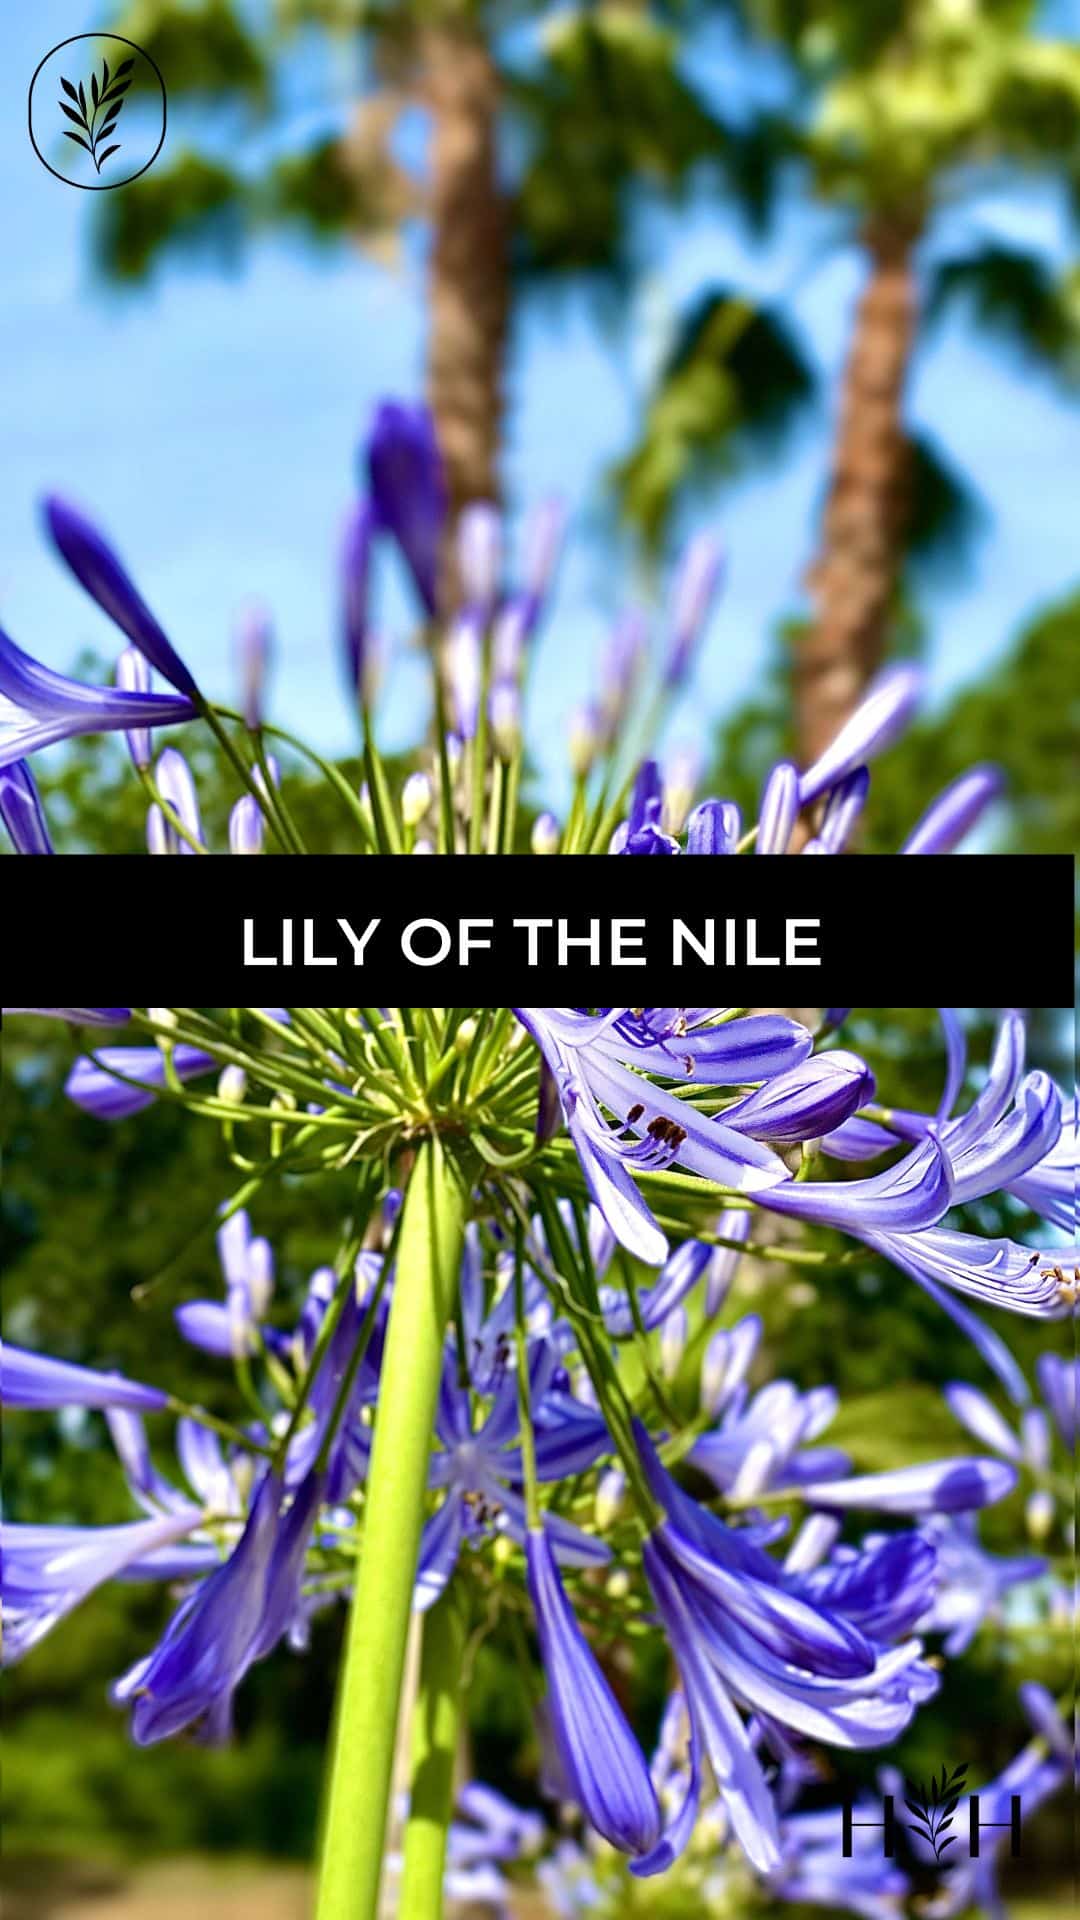 Lily of the nile via @home4theharvest